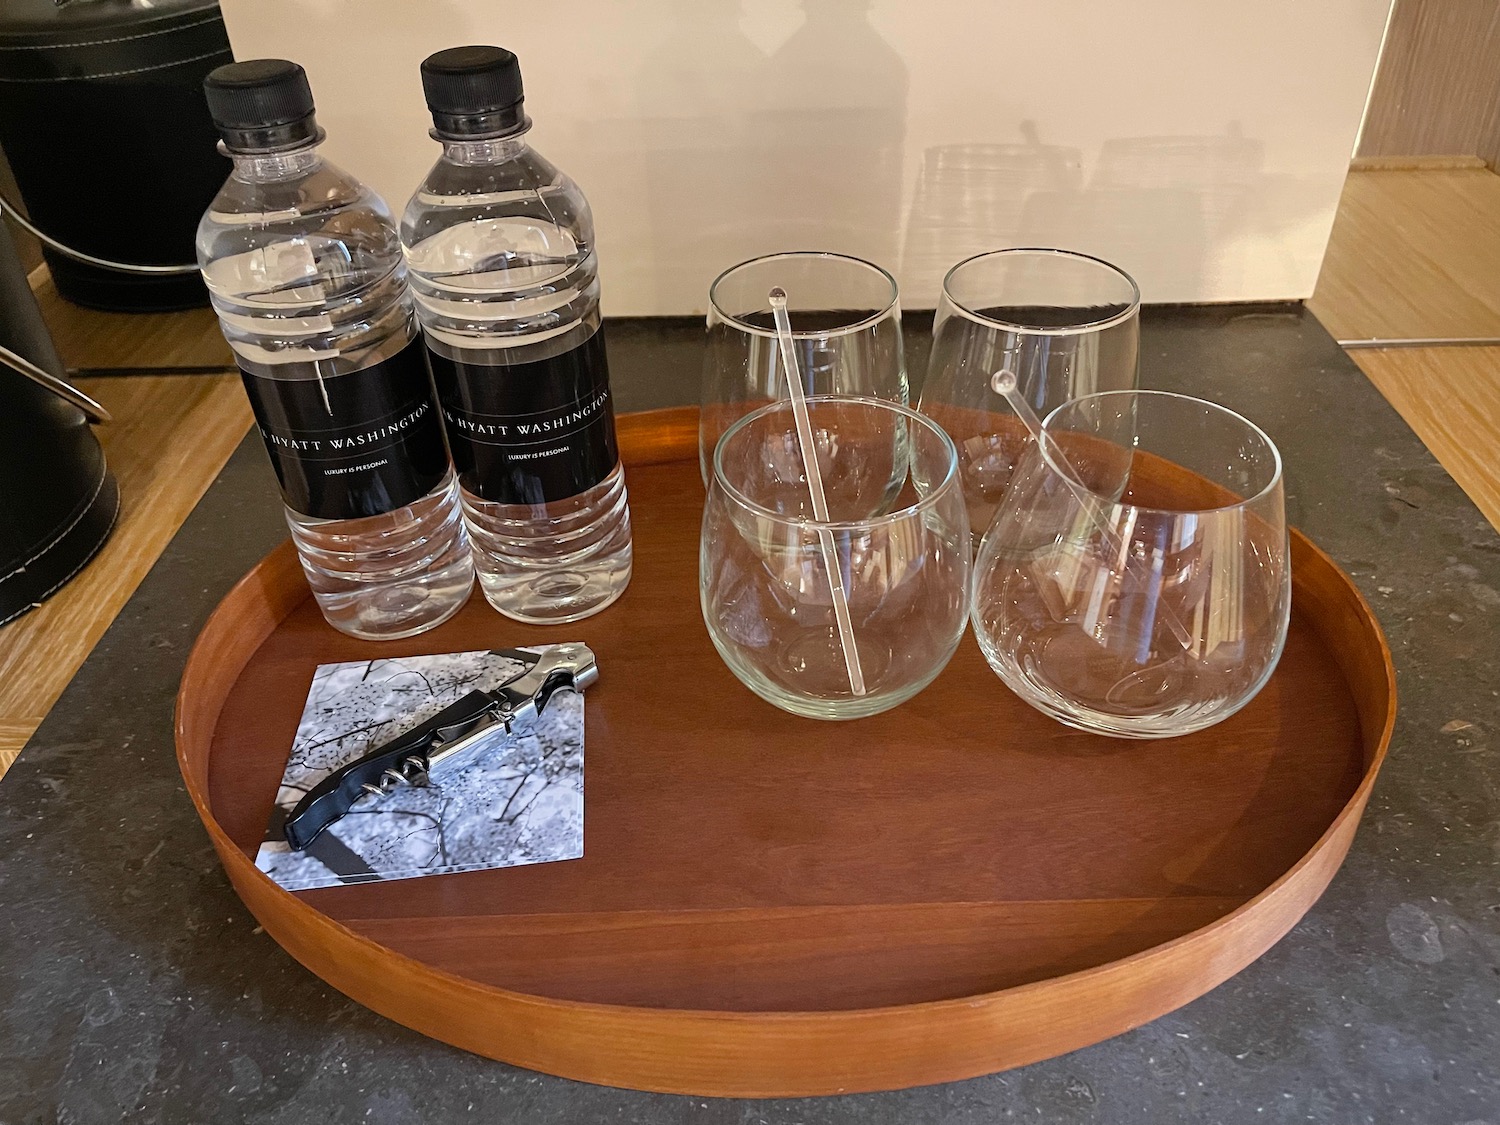 a tray with bottles and glasses on it